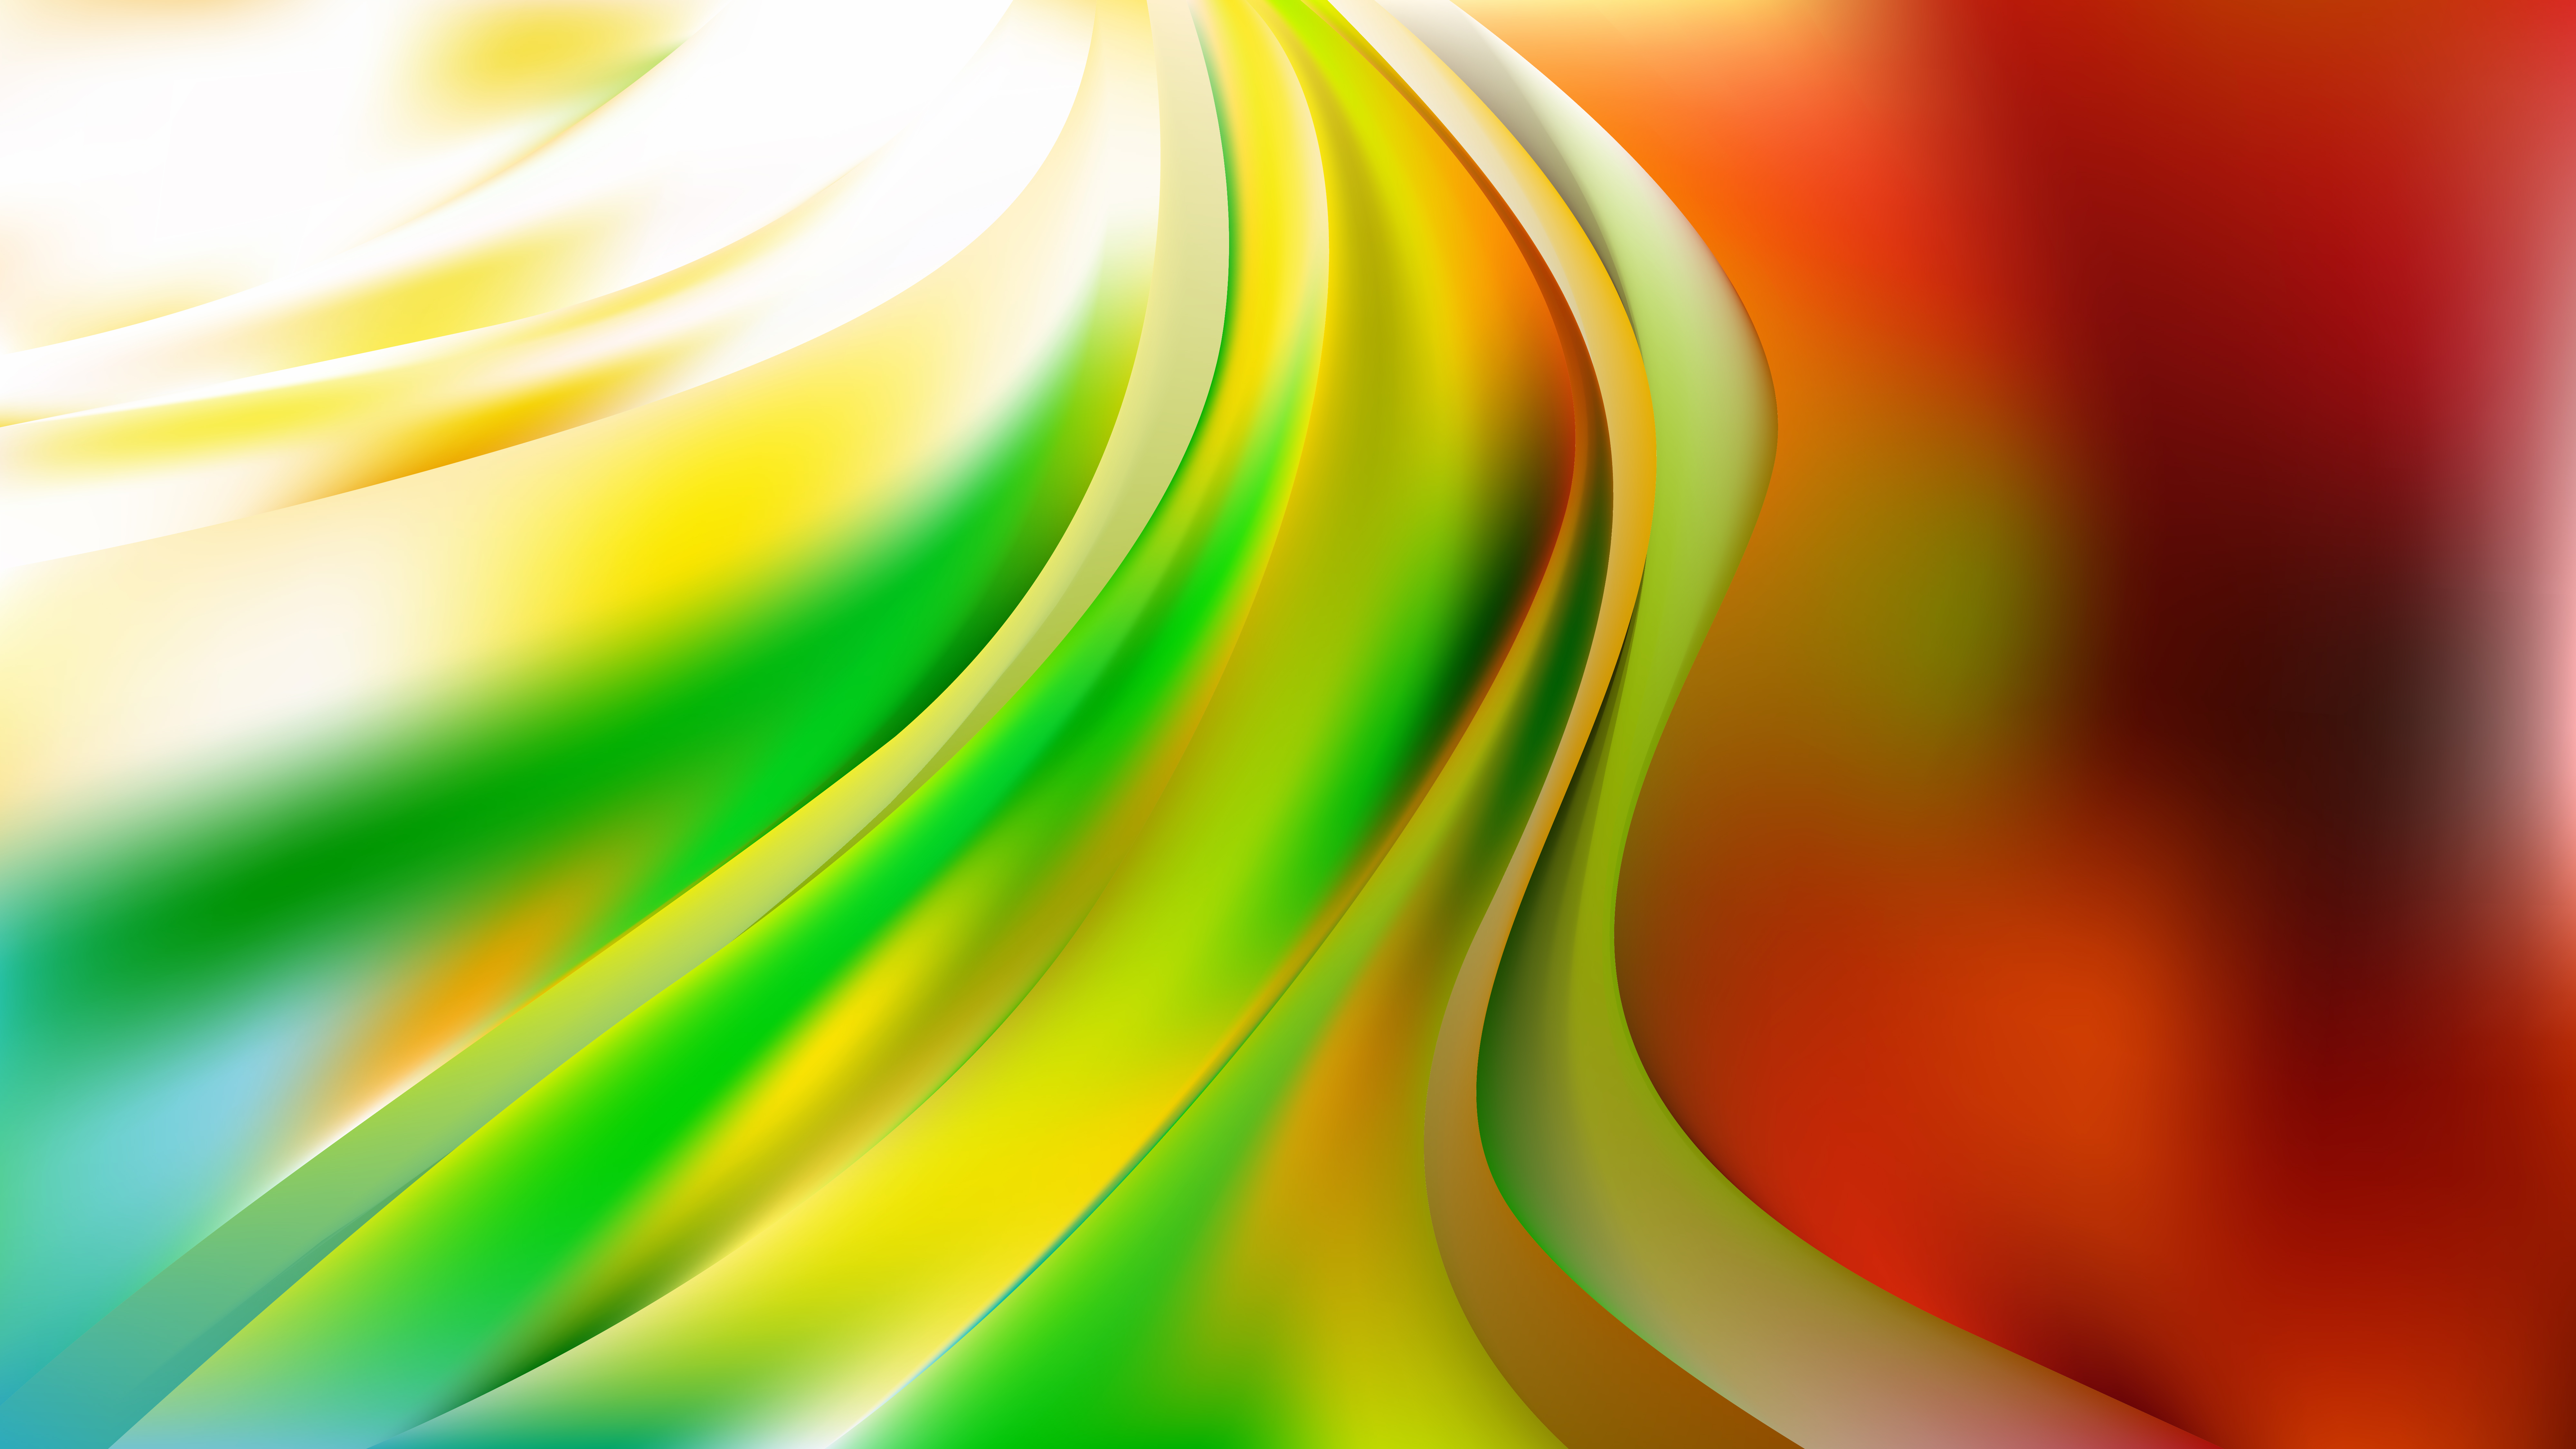 Free Red Yellow and Green Abstract Wave Background Image